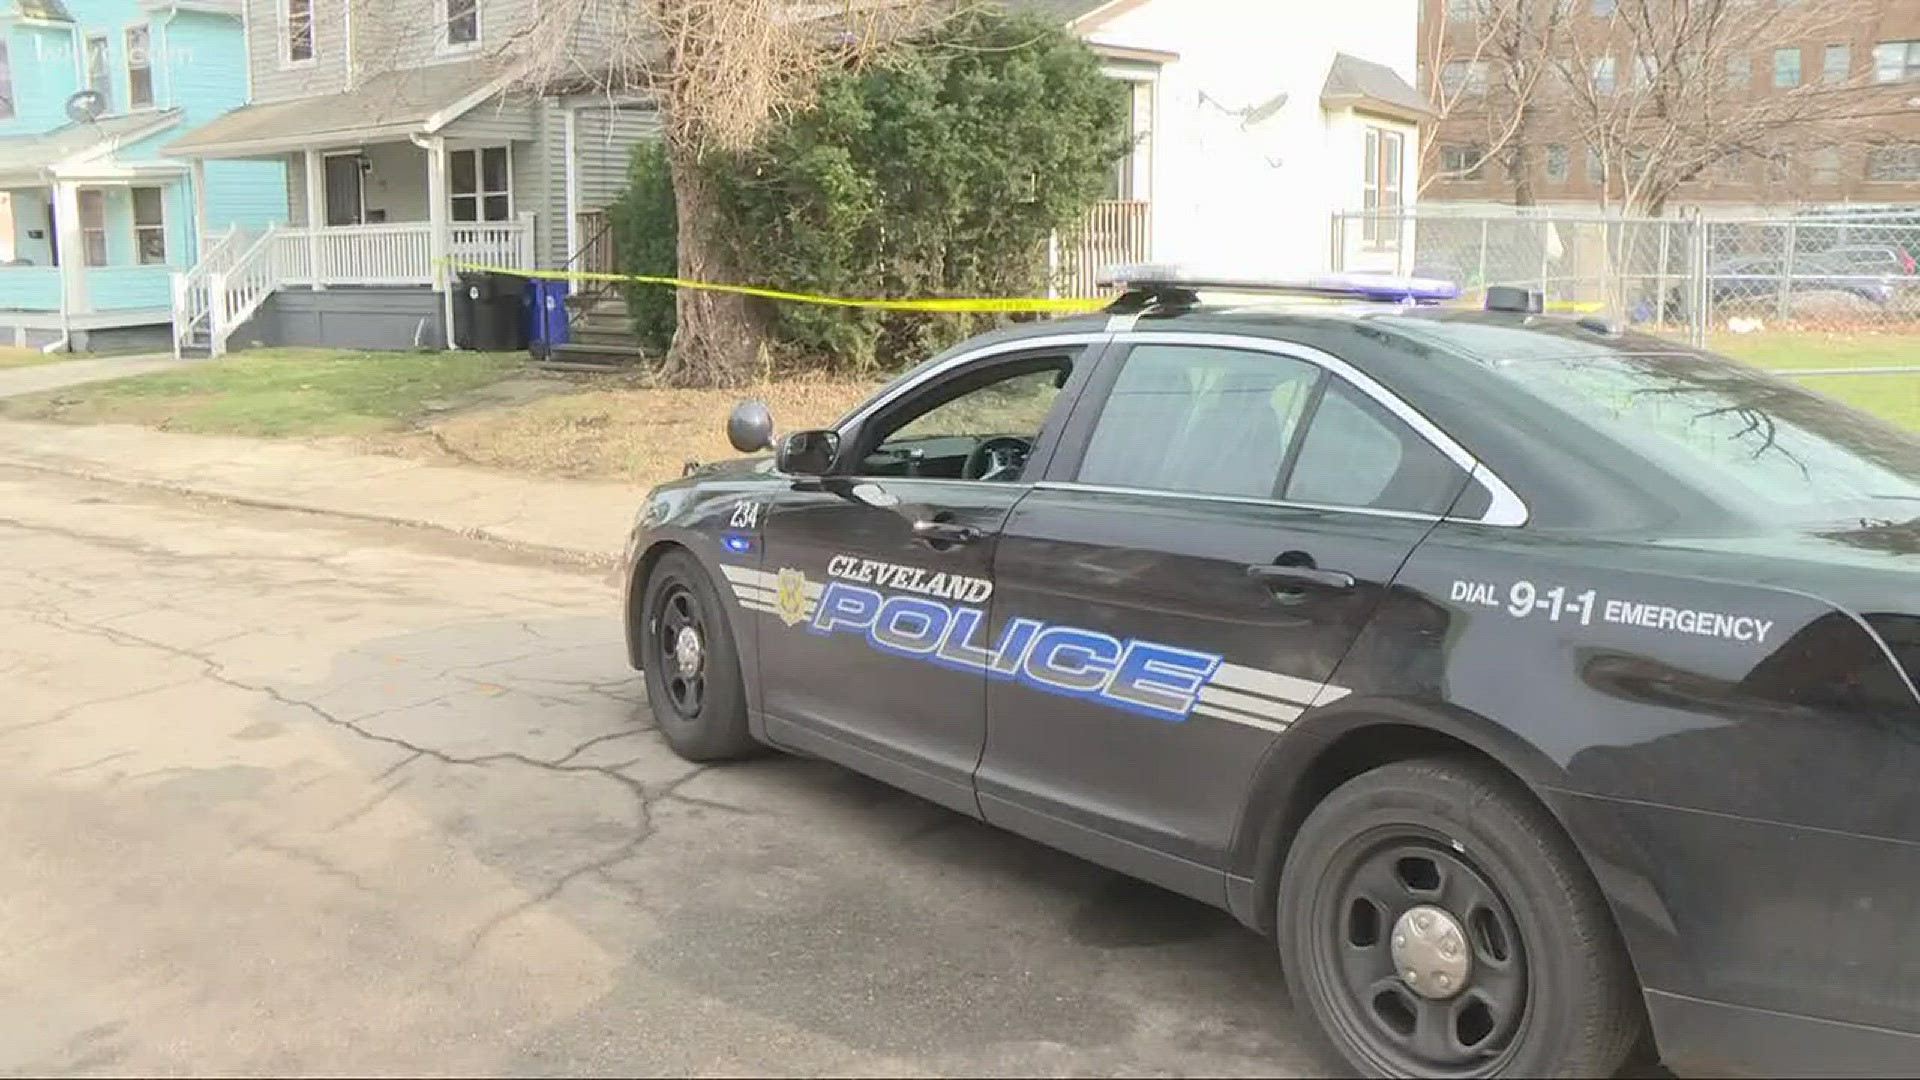 Police confirm human remains found in backyard of west side home